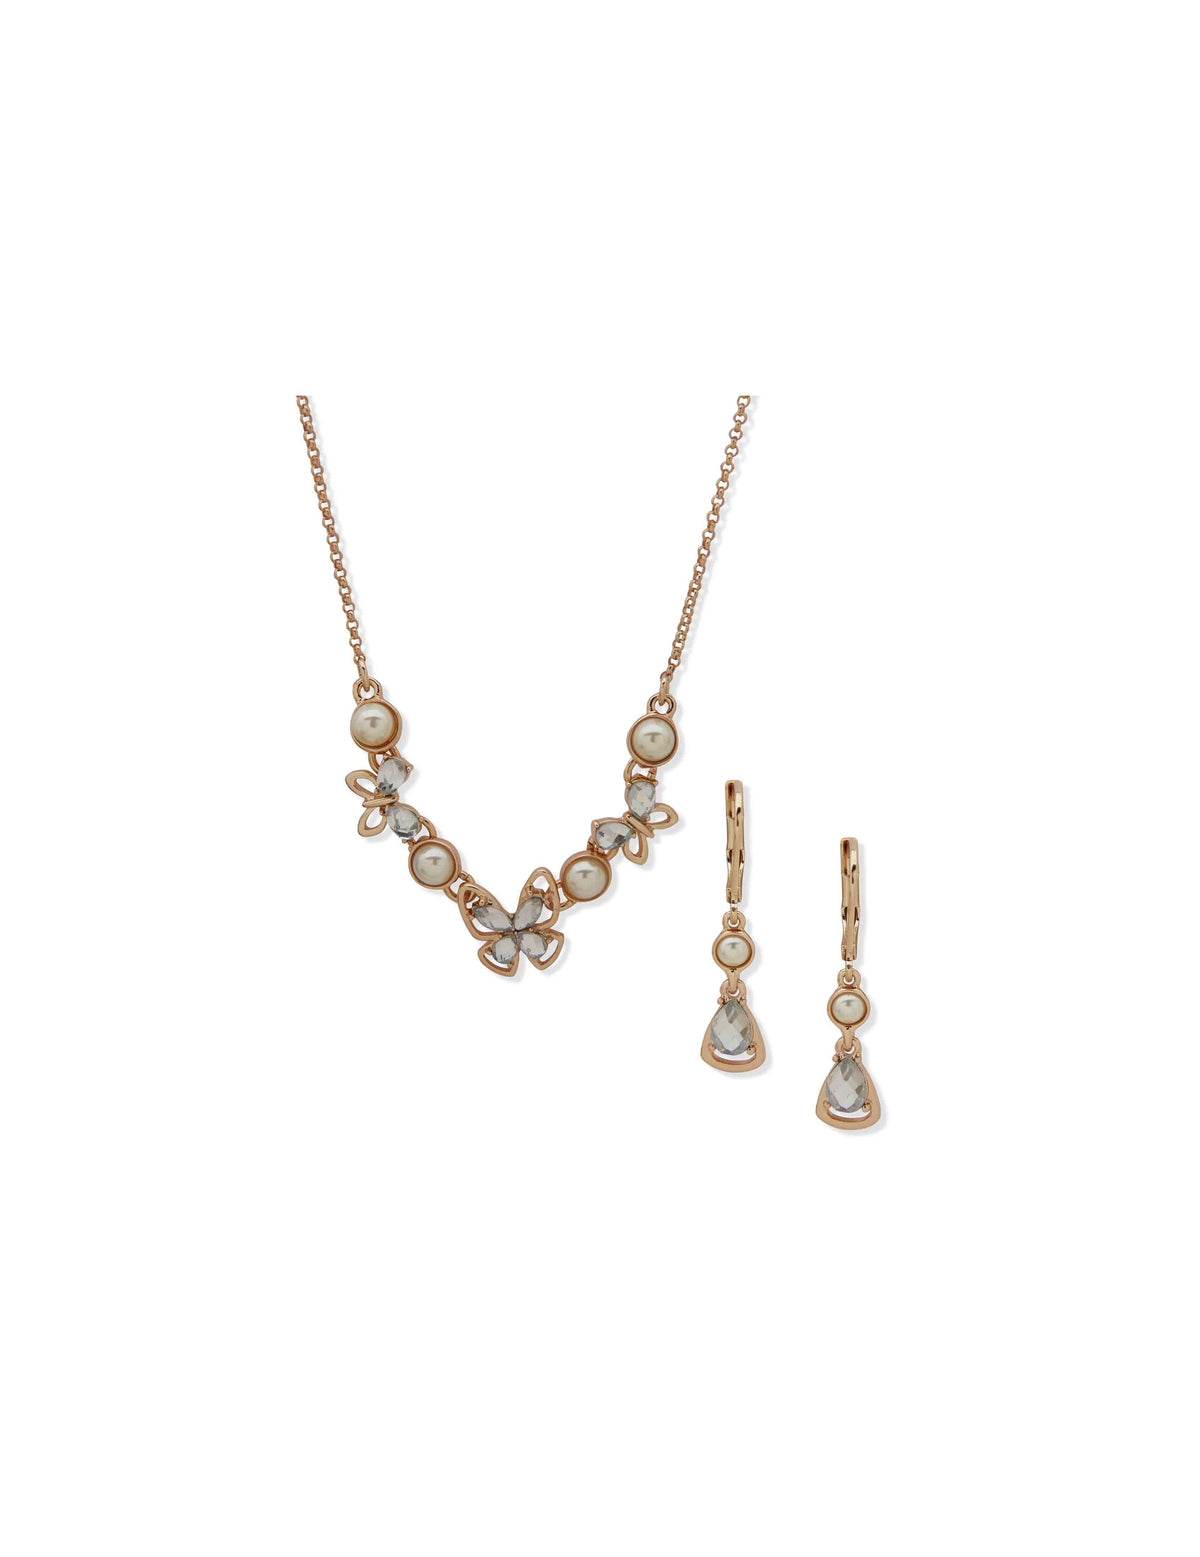 Anne Klein Gold Tone Butterfly Frontal Crystal Necklace and Earring Set